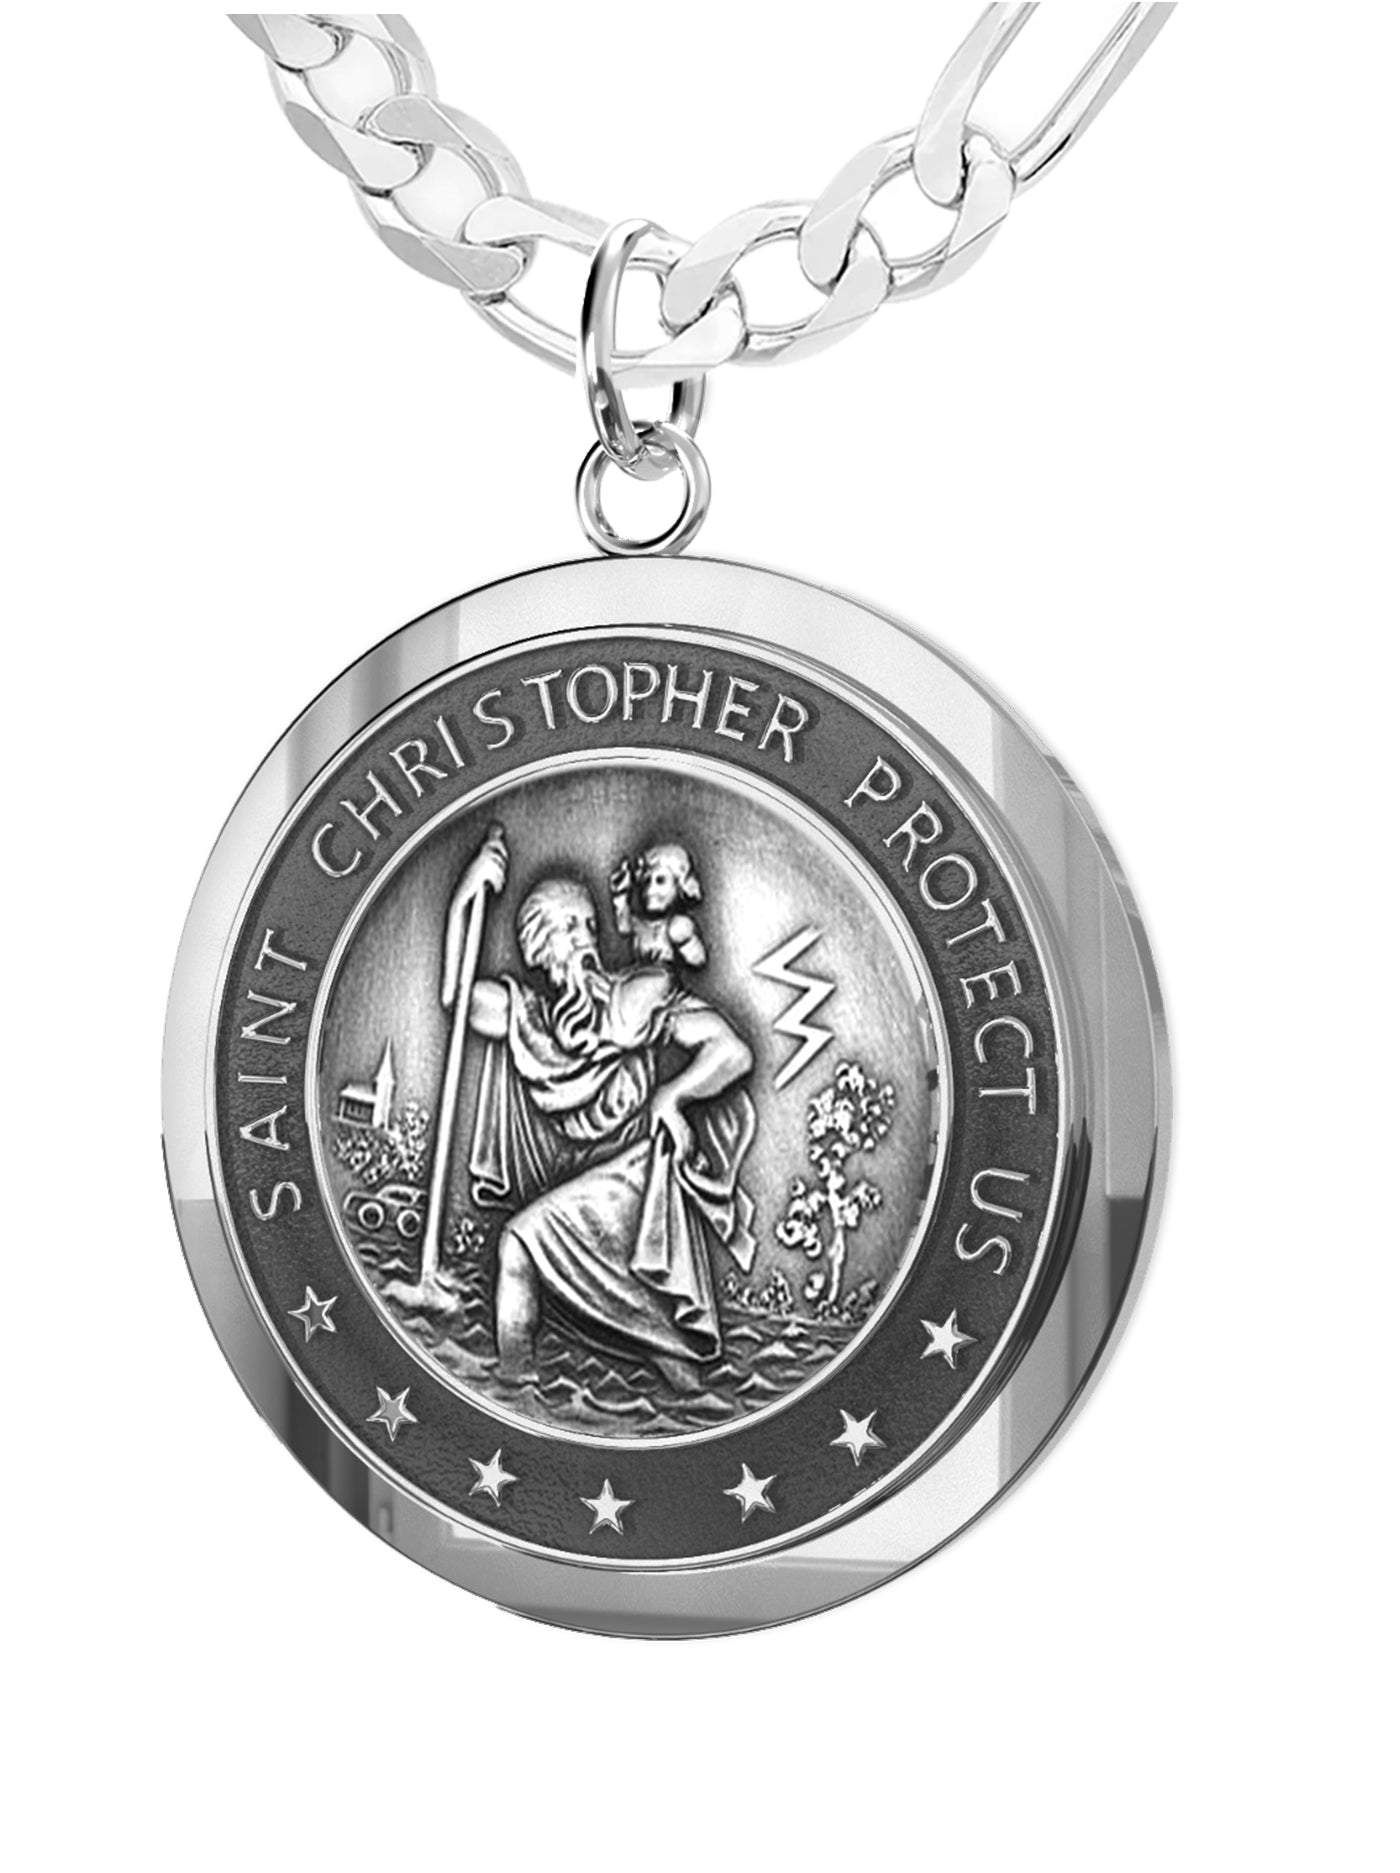 St. Christopher Necklace - Sterling Silver Round Medal on 24